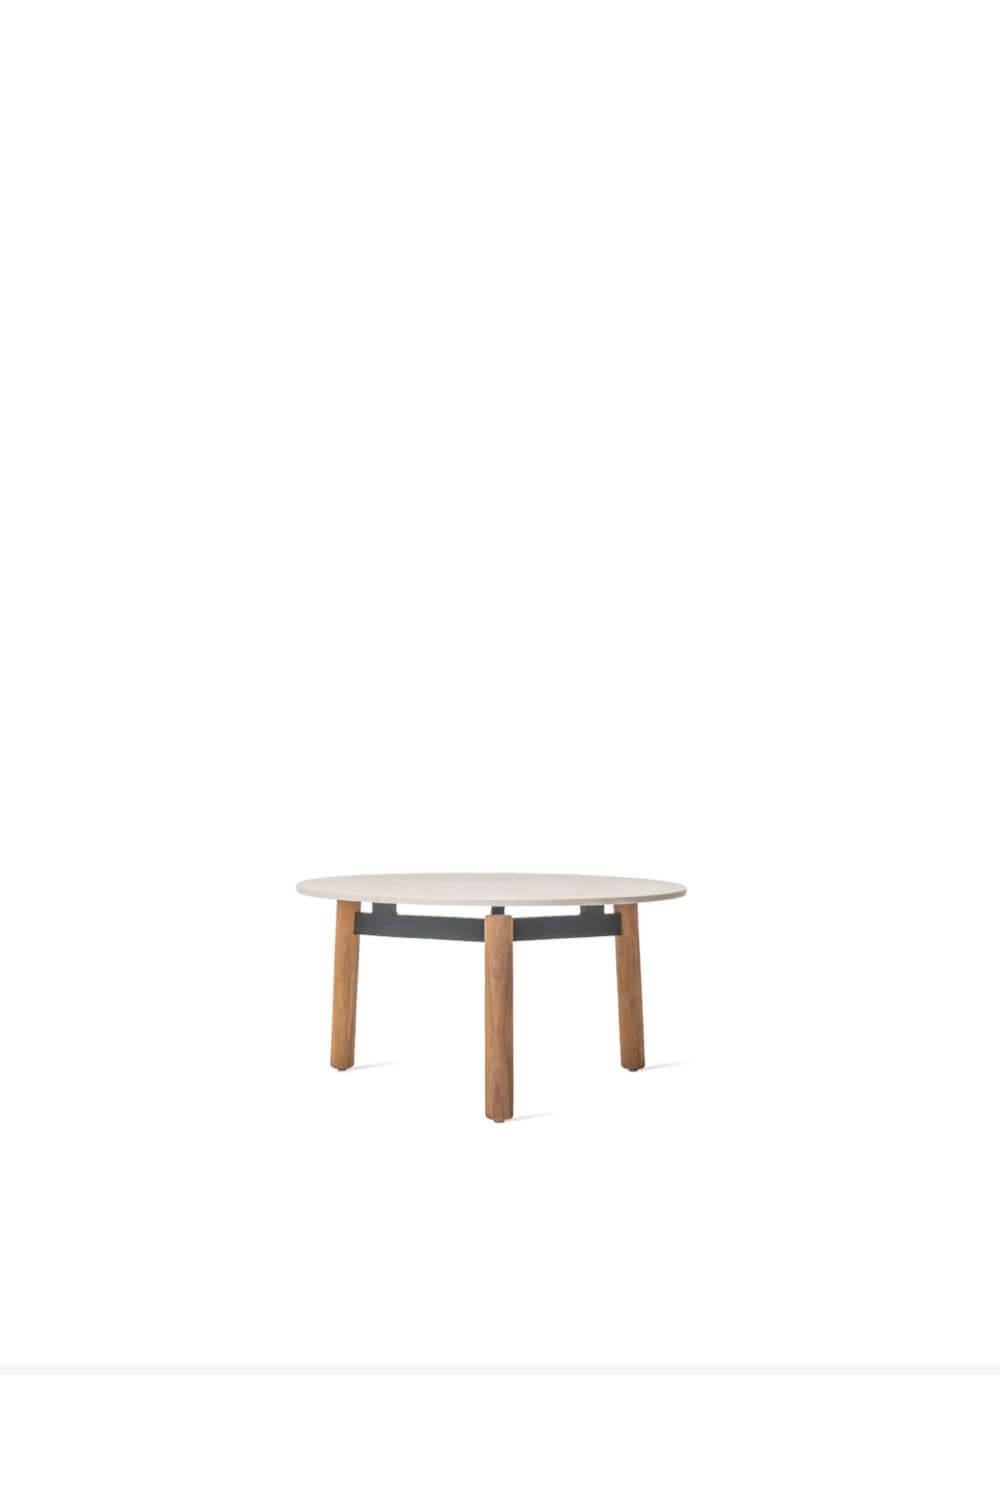 Vincent Sheppard LENTO coffee table